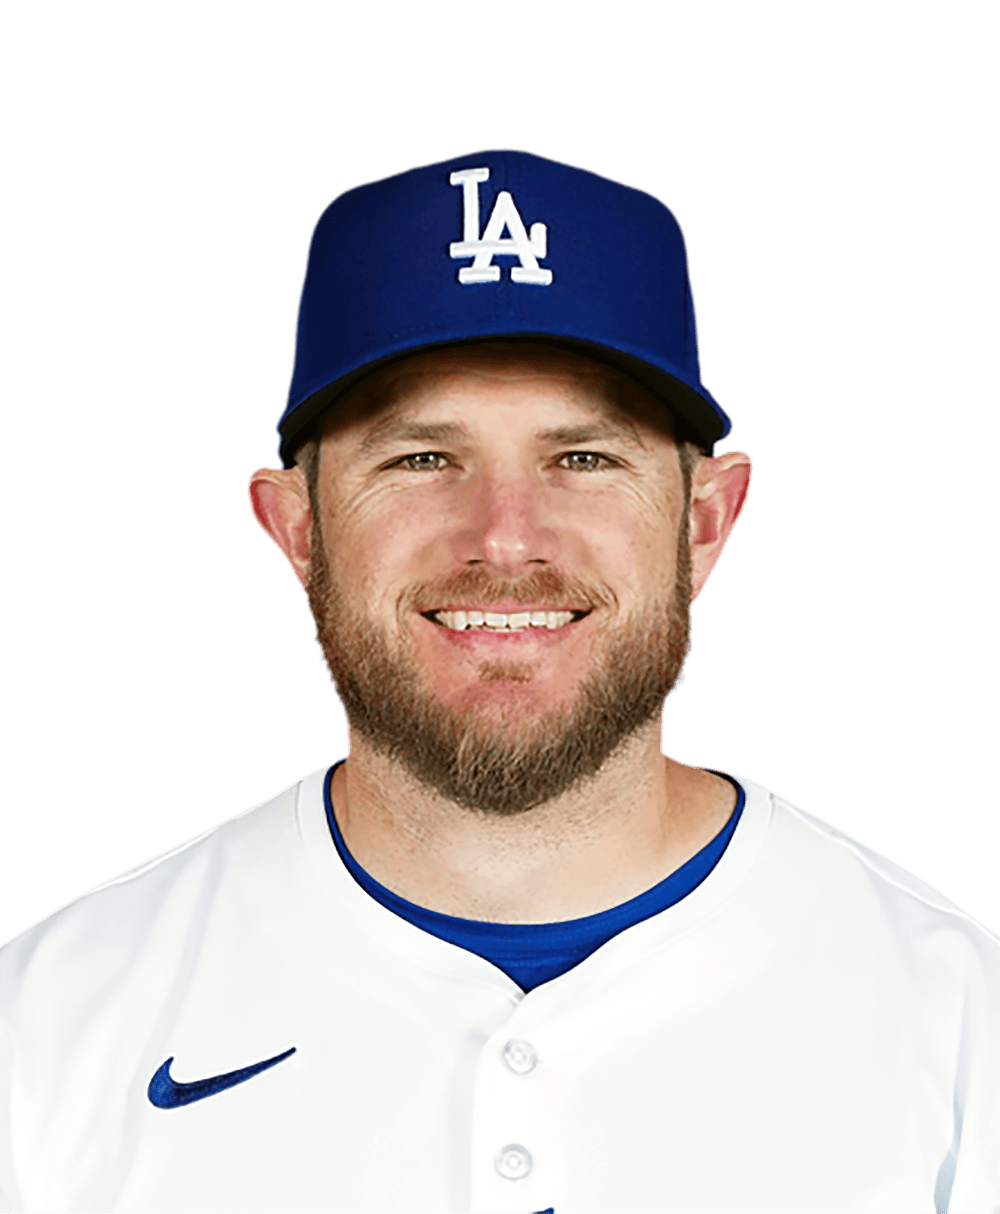 Official Max Muncy Los Angeles Dodgers Jerseys, Dodgers Max Muncy Baseball  Jerseys, Uniforms